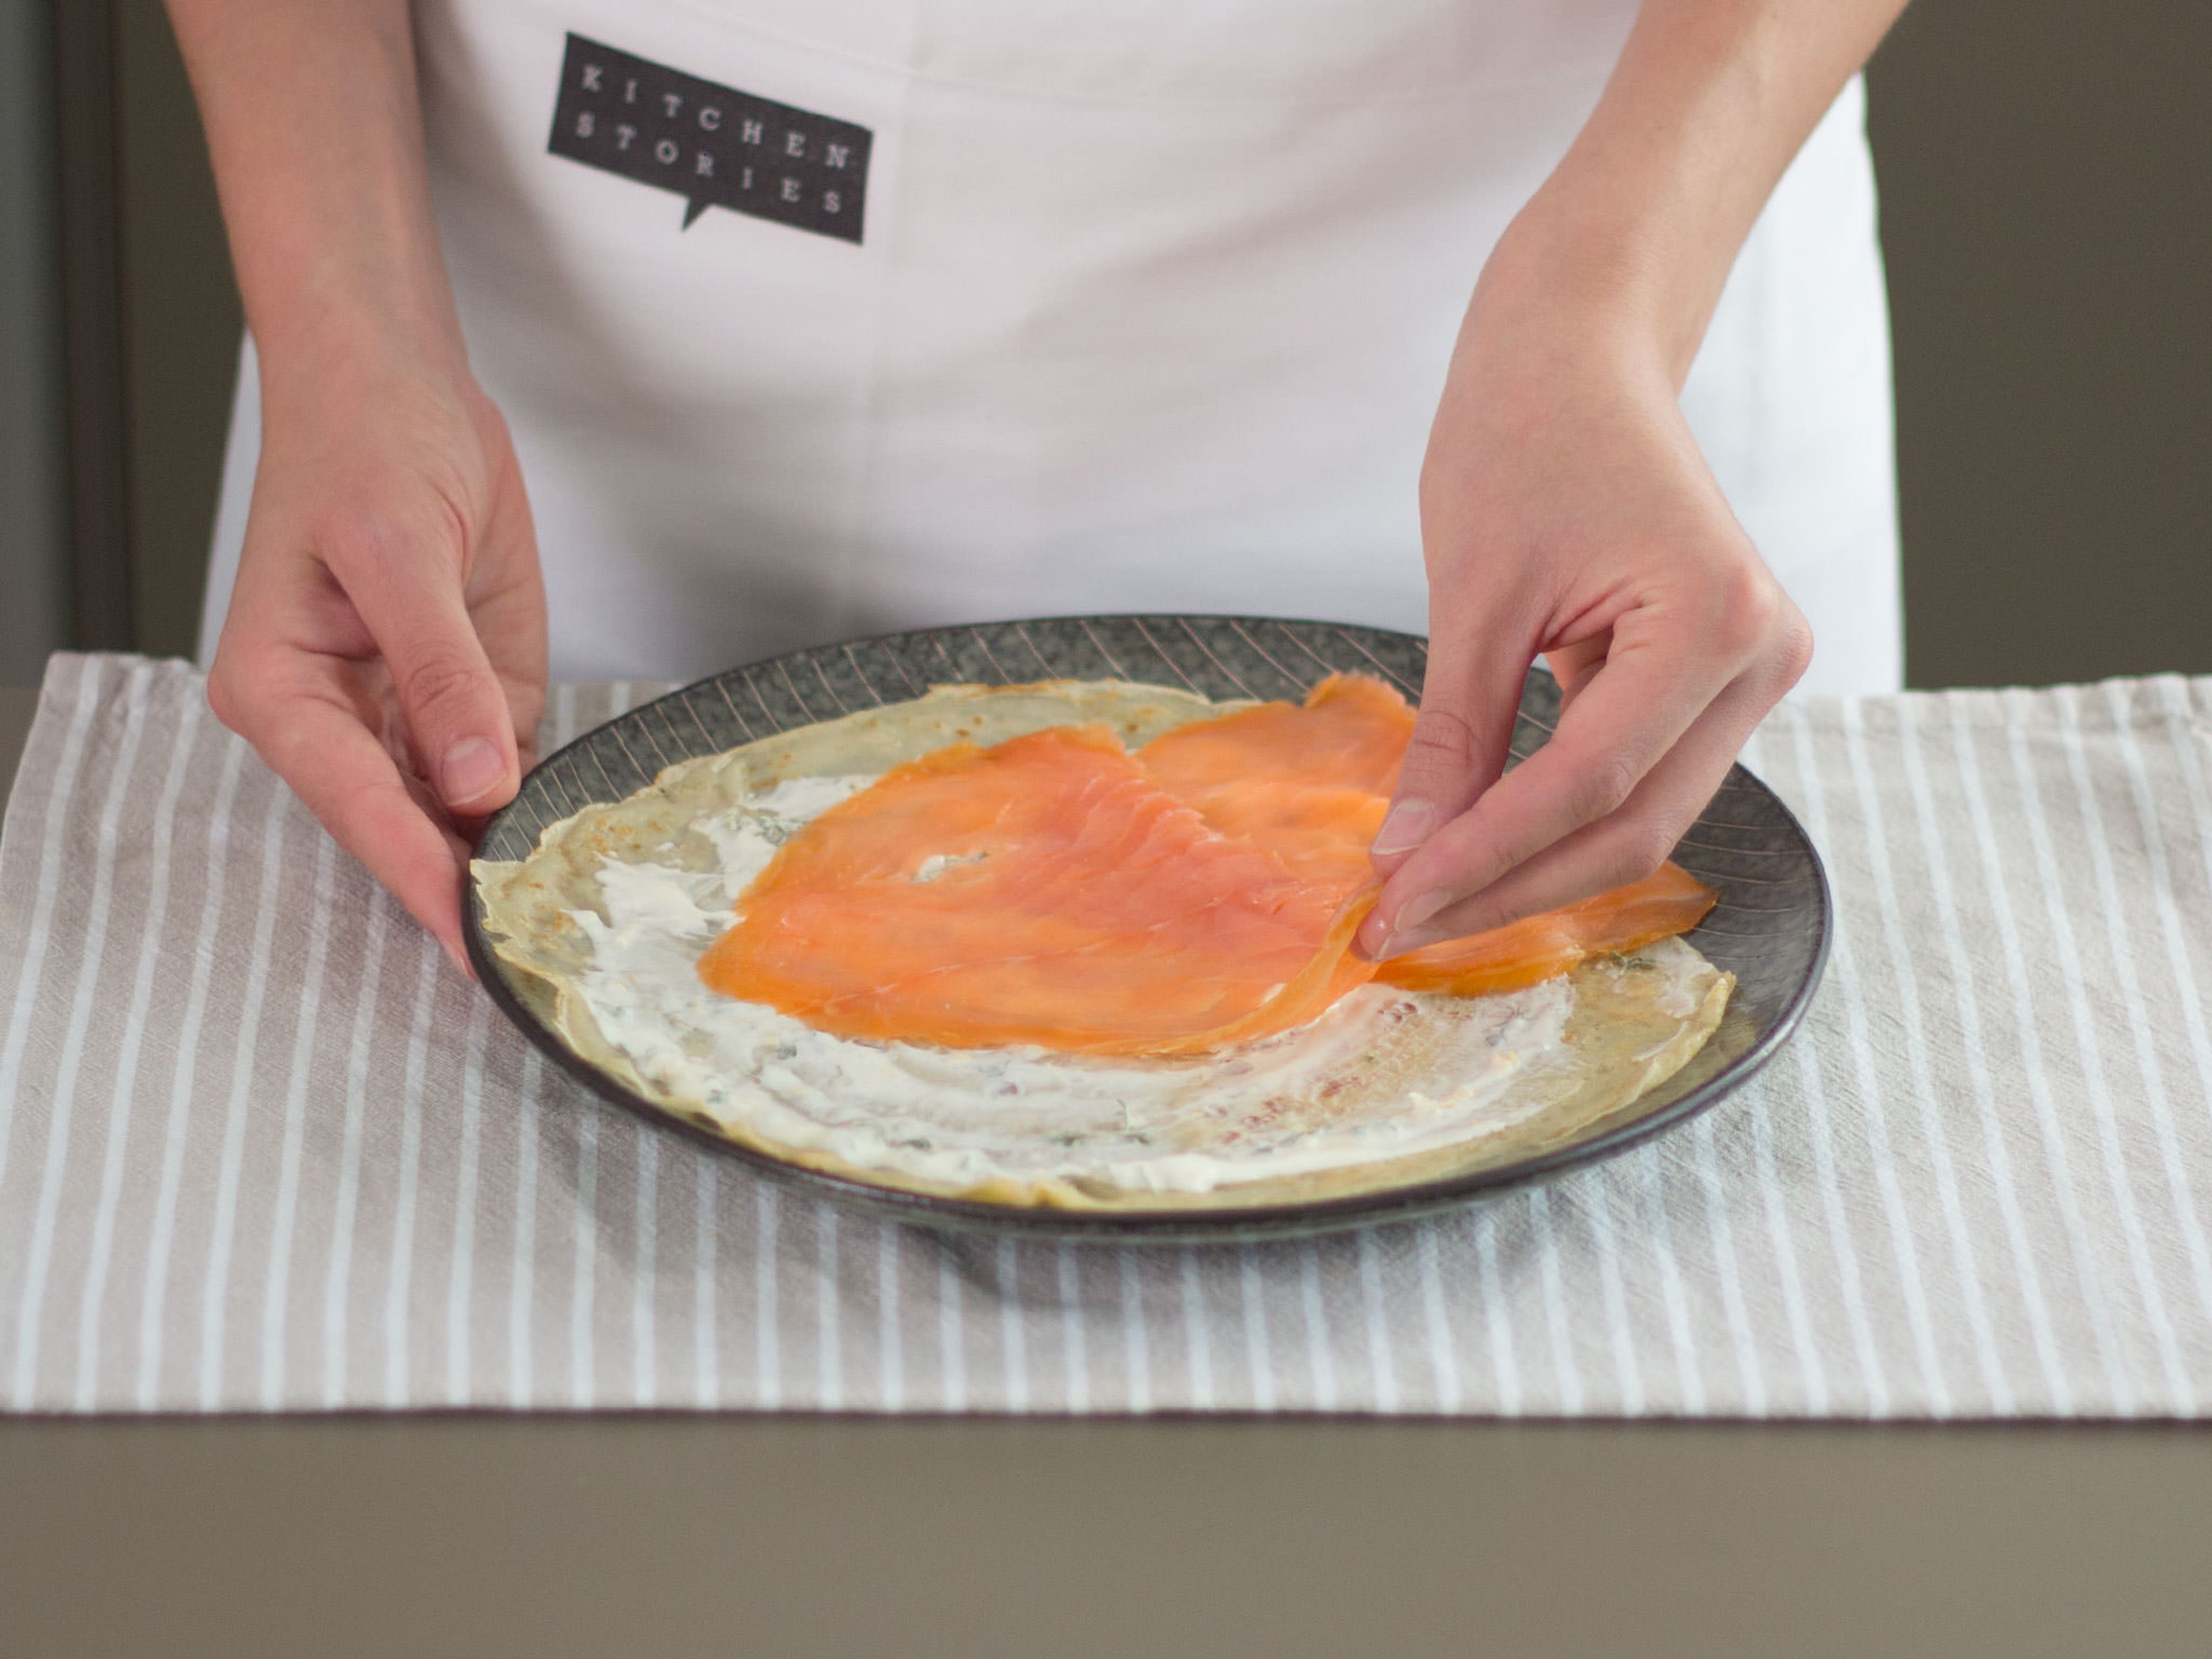 When the crepes have cooled down, spread an even, thin layer of crème fraiche on top, fill with smoked salmon, and roll up for serving. Garnish with a dollop of crème fraiche and salmon caviar.